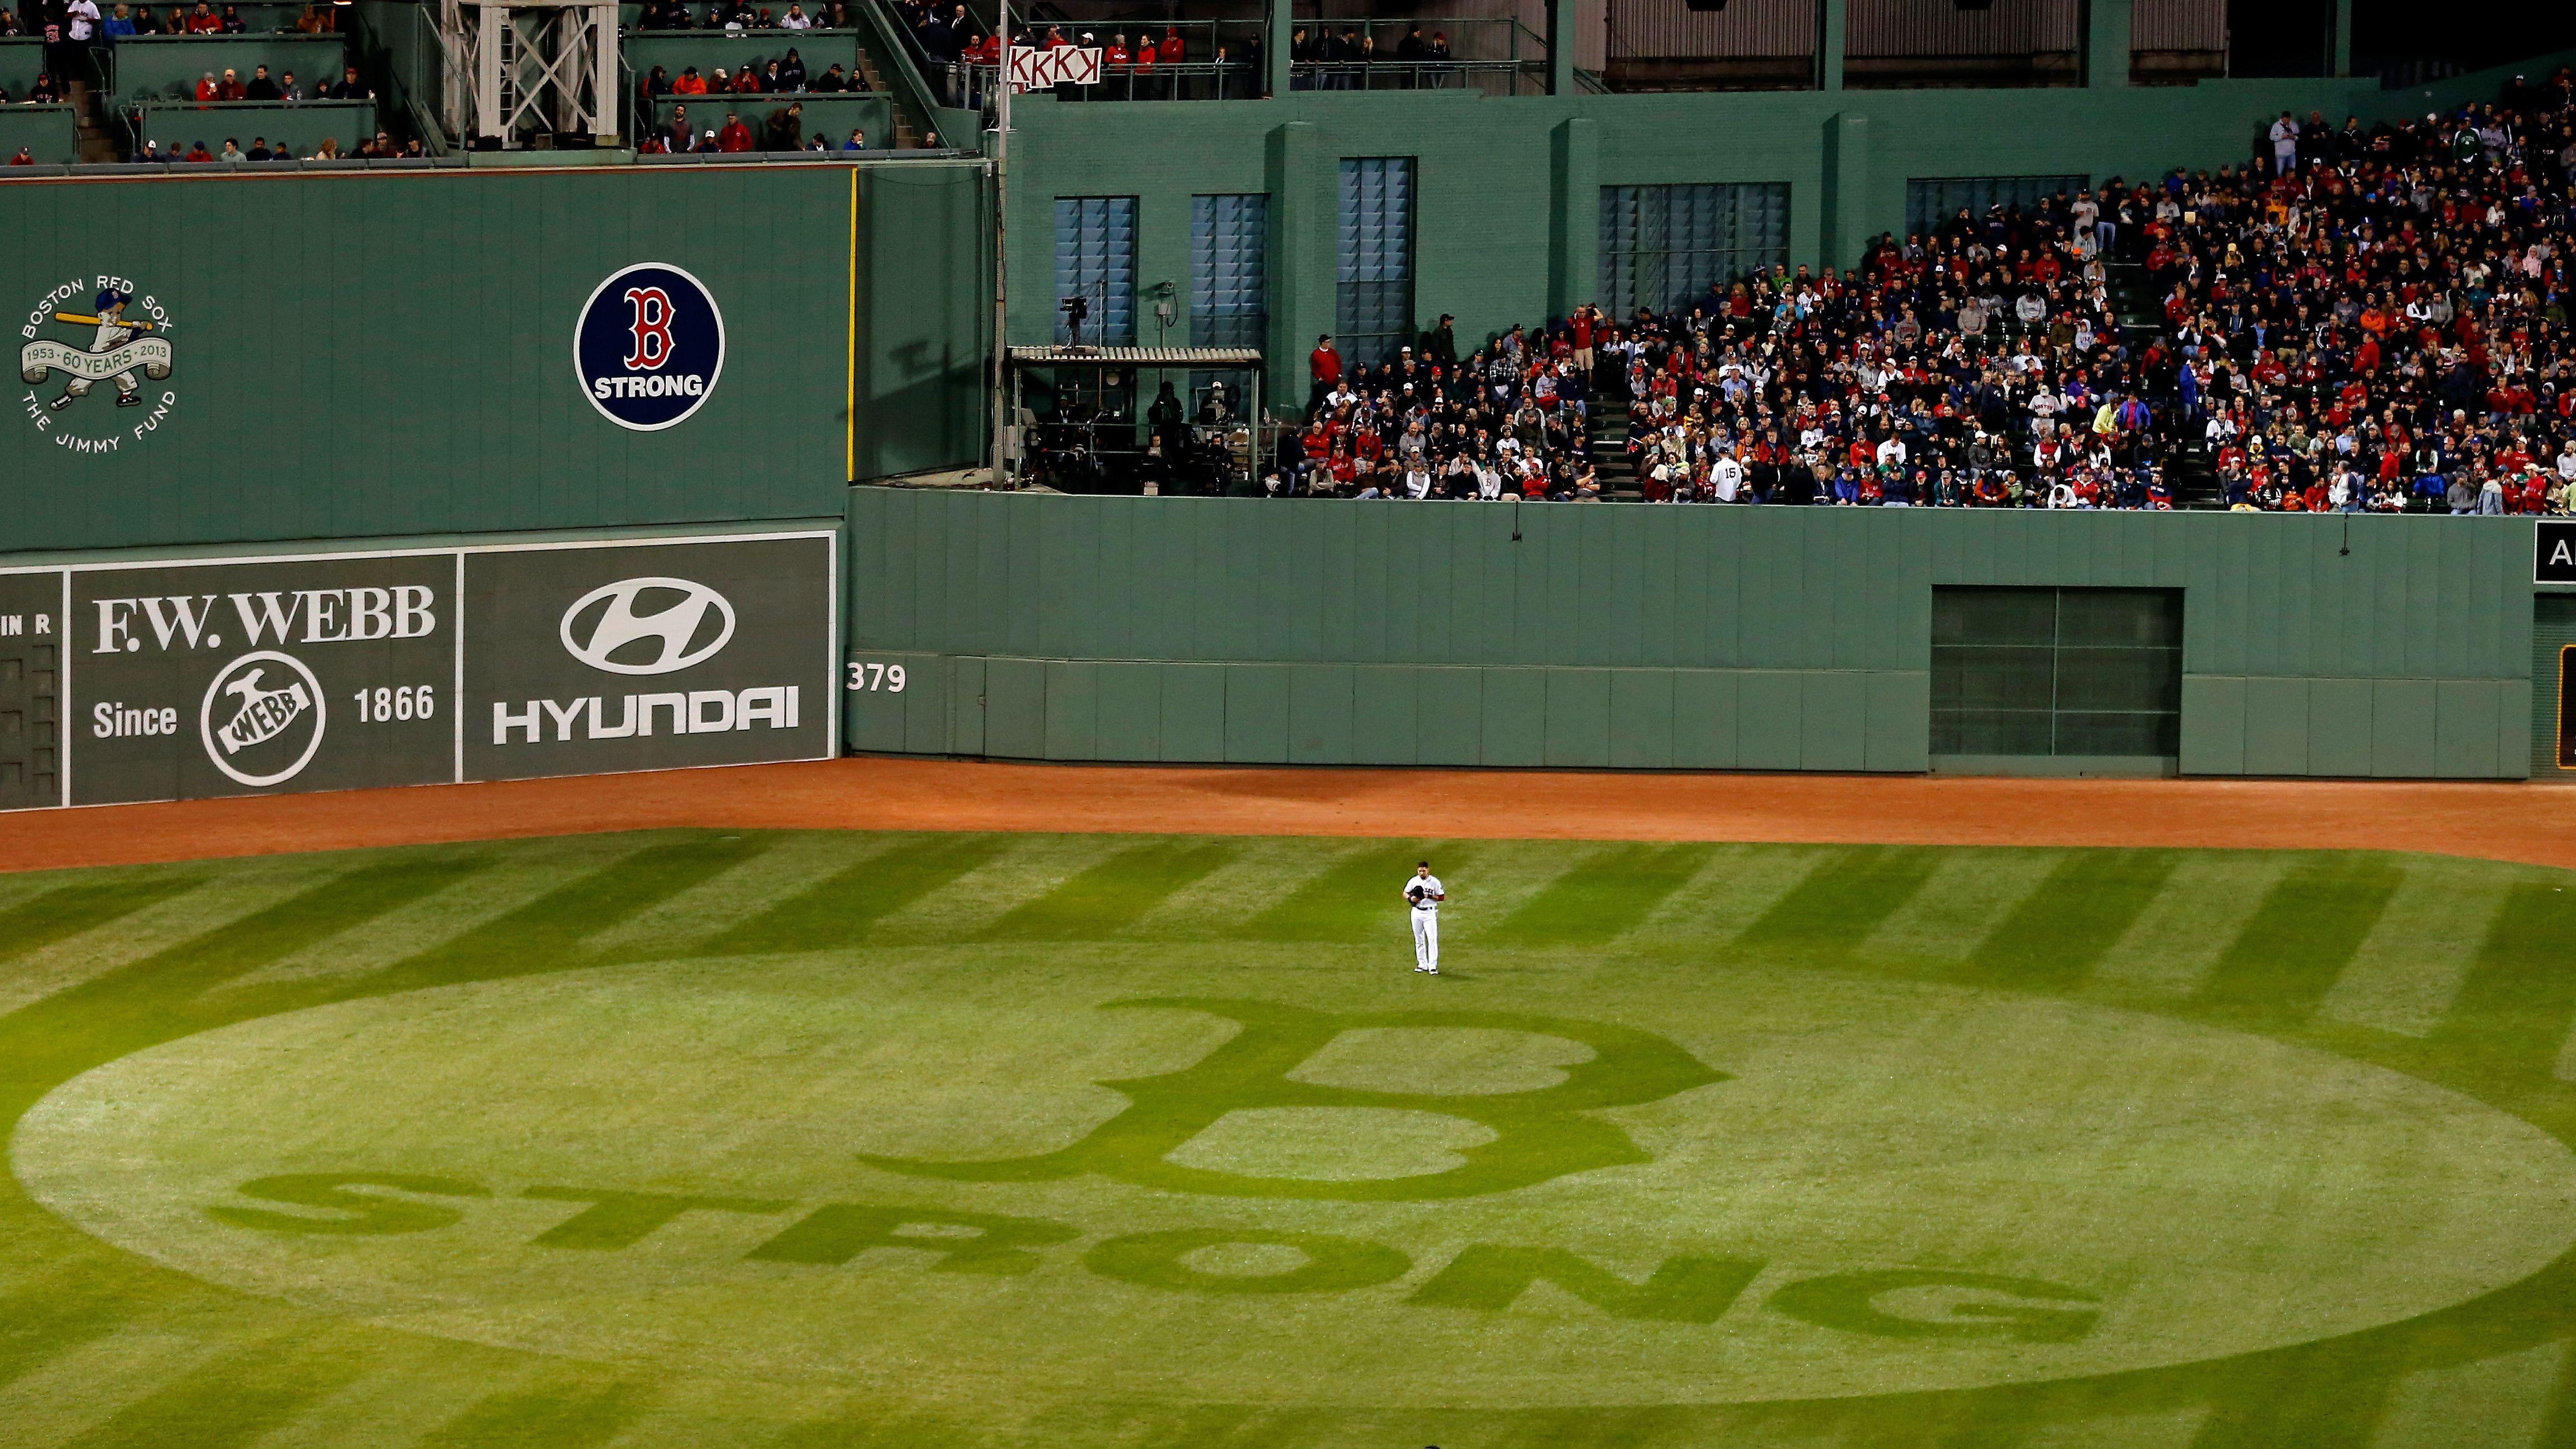 B Strong Logo - Report: Red Sox May Be Sued By Charitable Foundation Over Use Of 'B ...